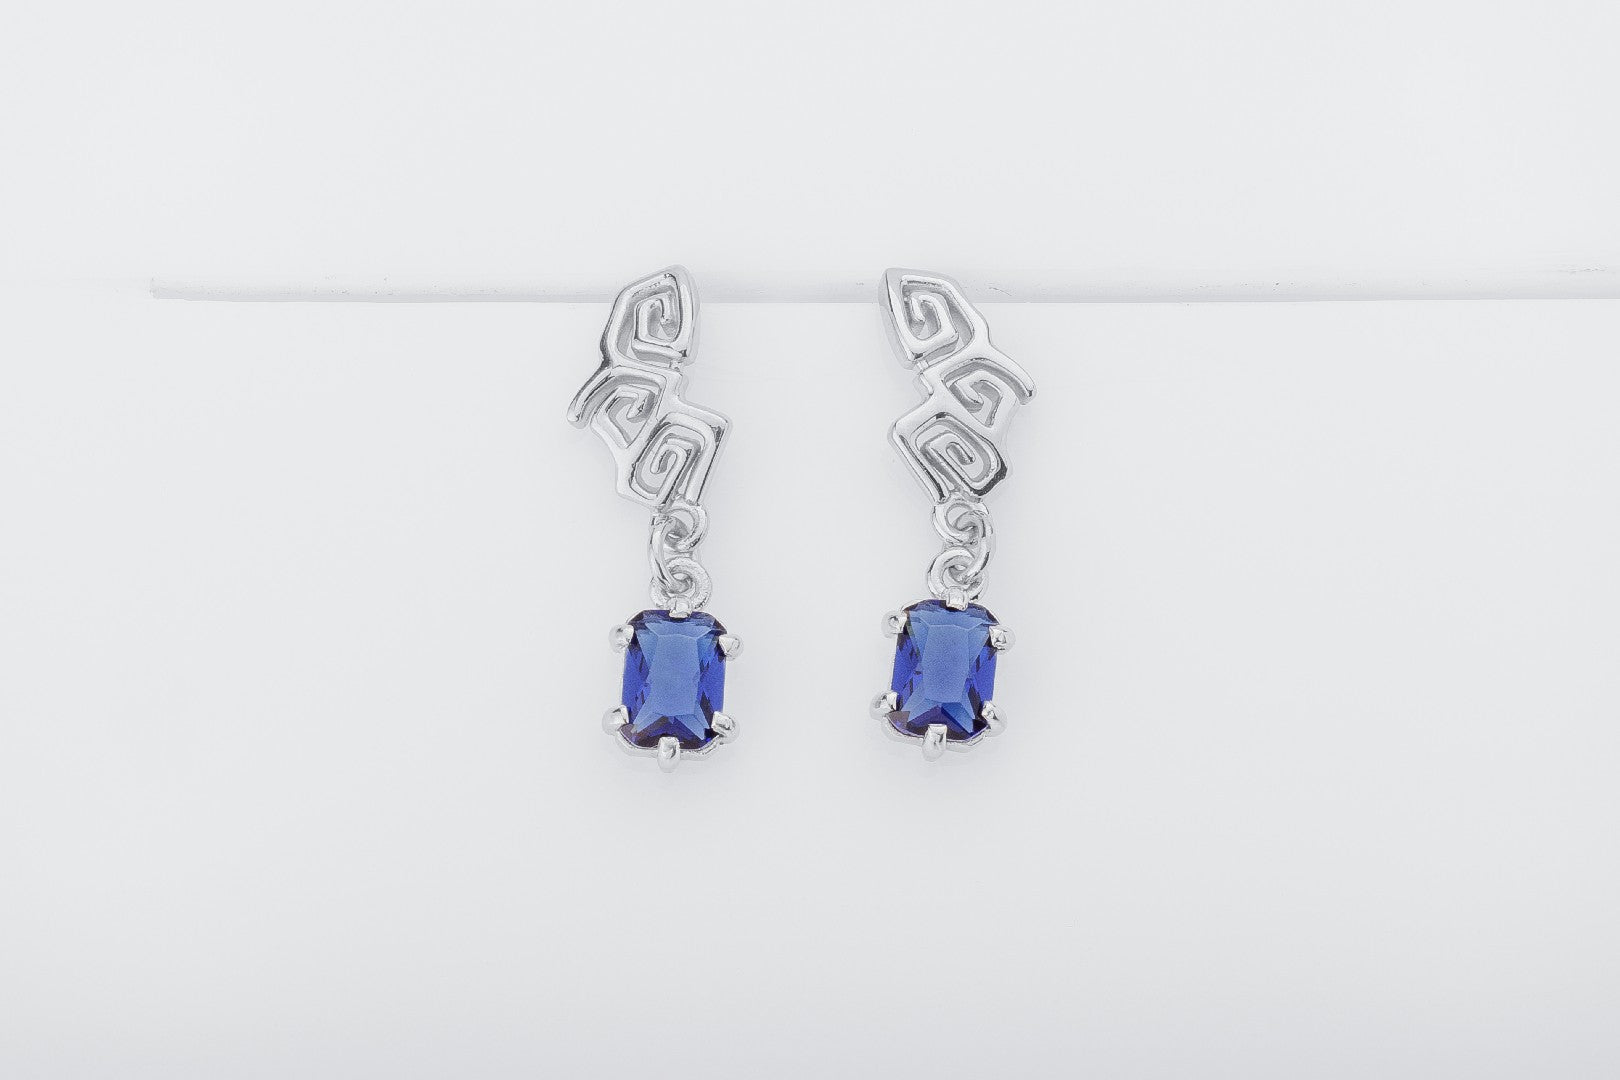 Sea Whirlpools Earrings with Blue Gems, 925 silver